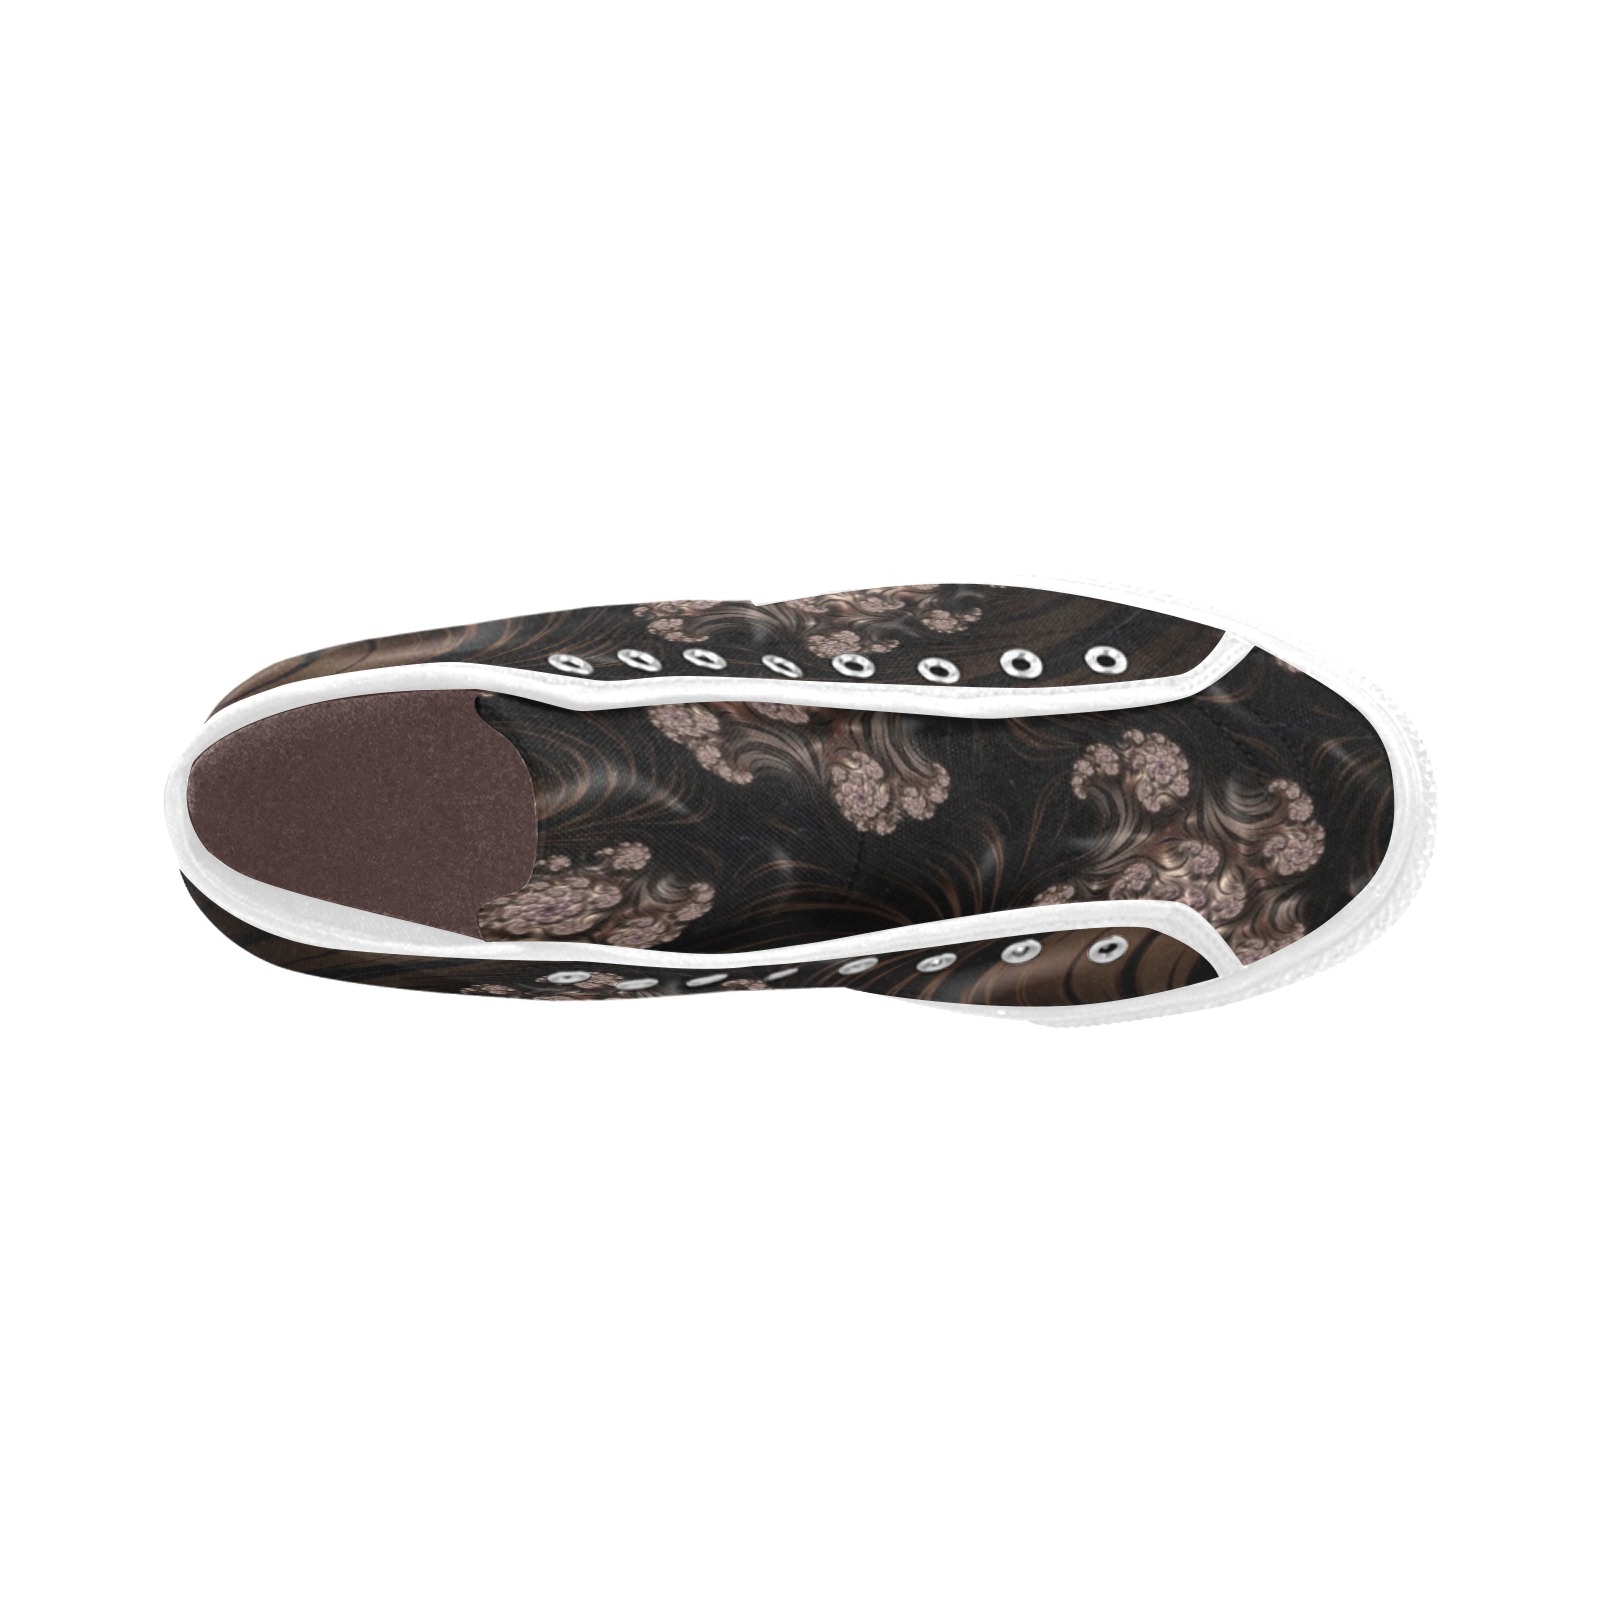 Blossoms and Dark Chocolate Swirls Fractal Abstract Vancouver H Women's Canvas Shoes (1013-1)